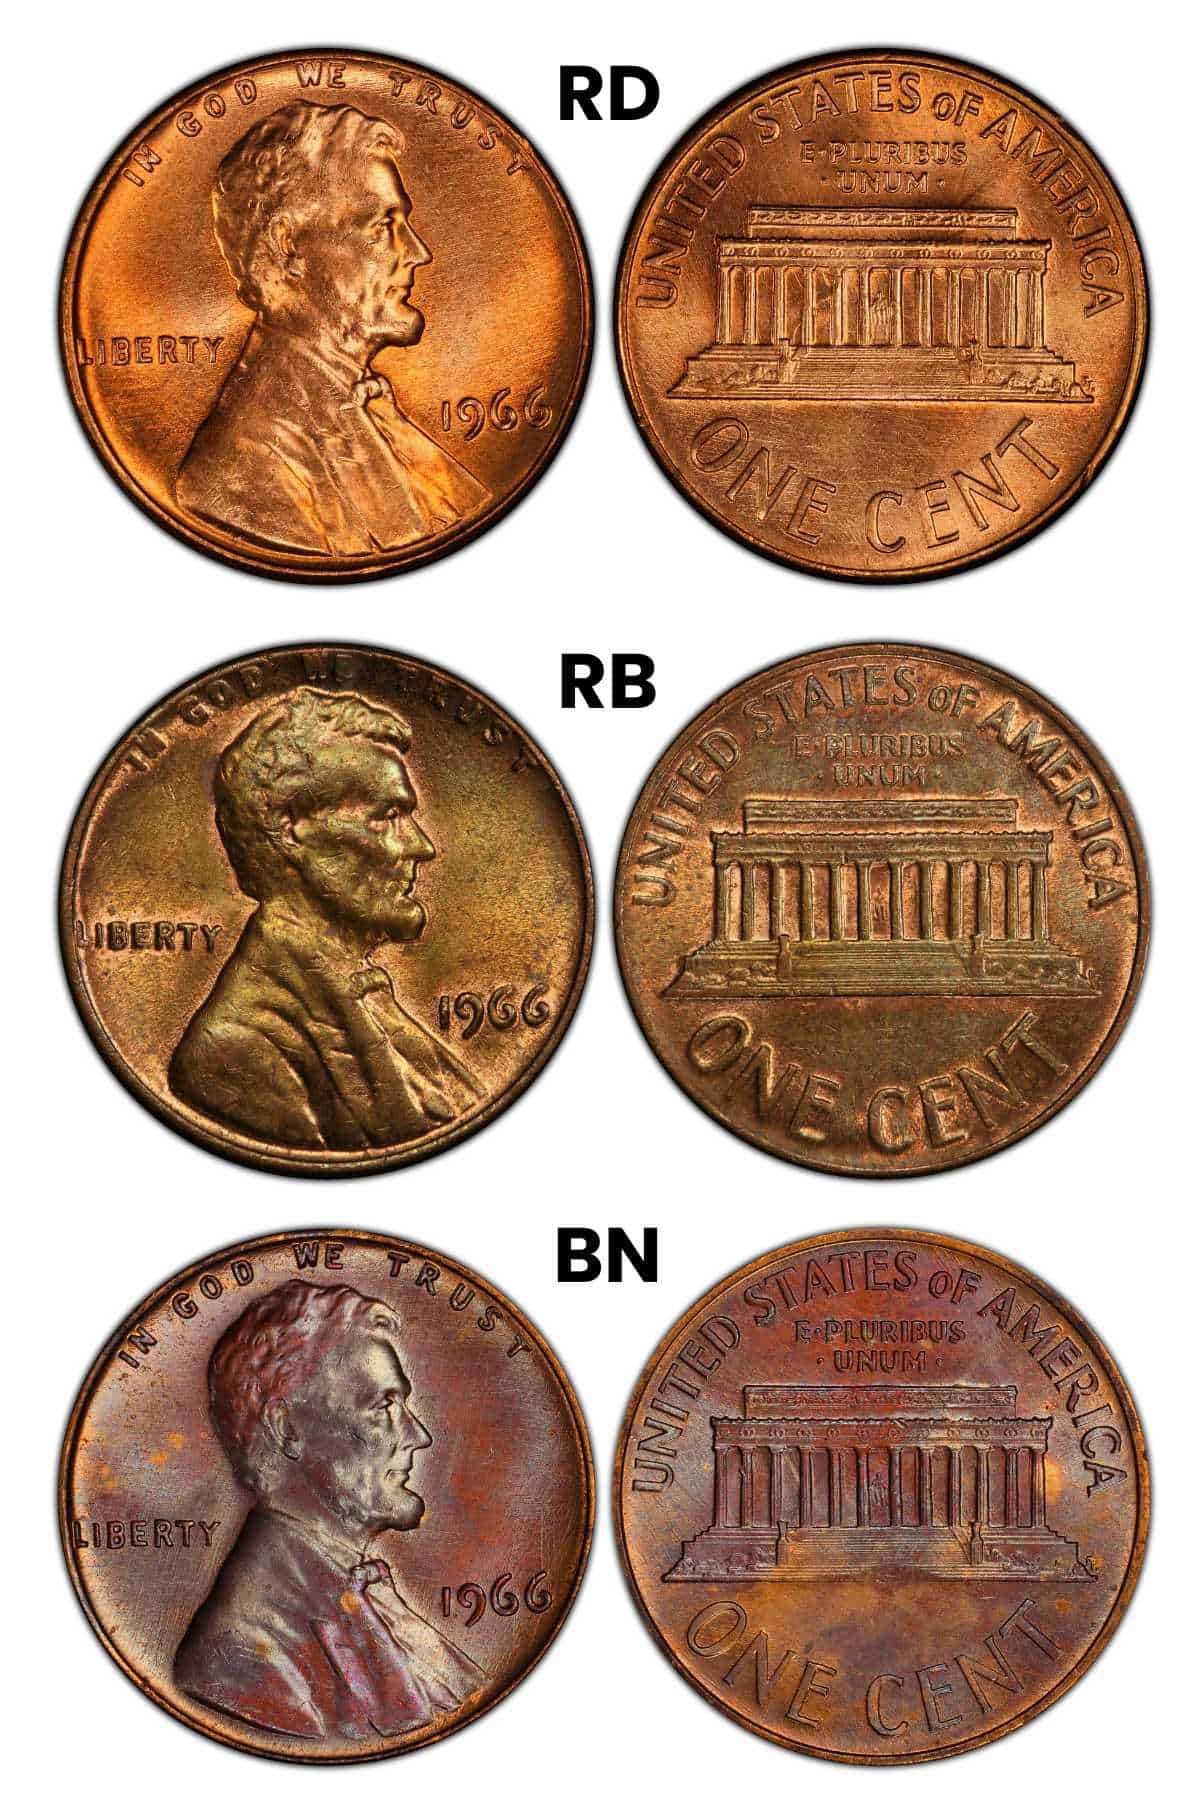 How Much is a 1966 Penny